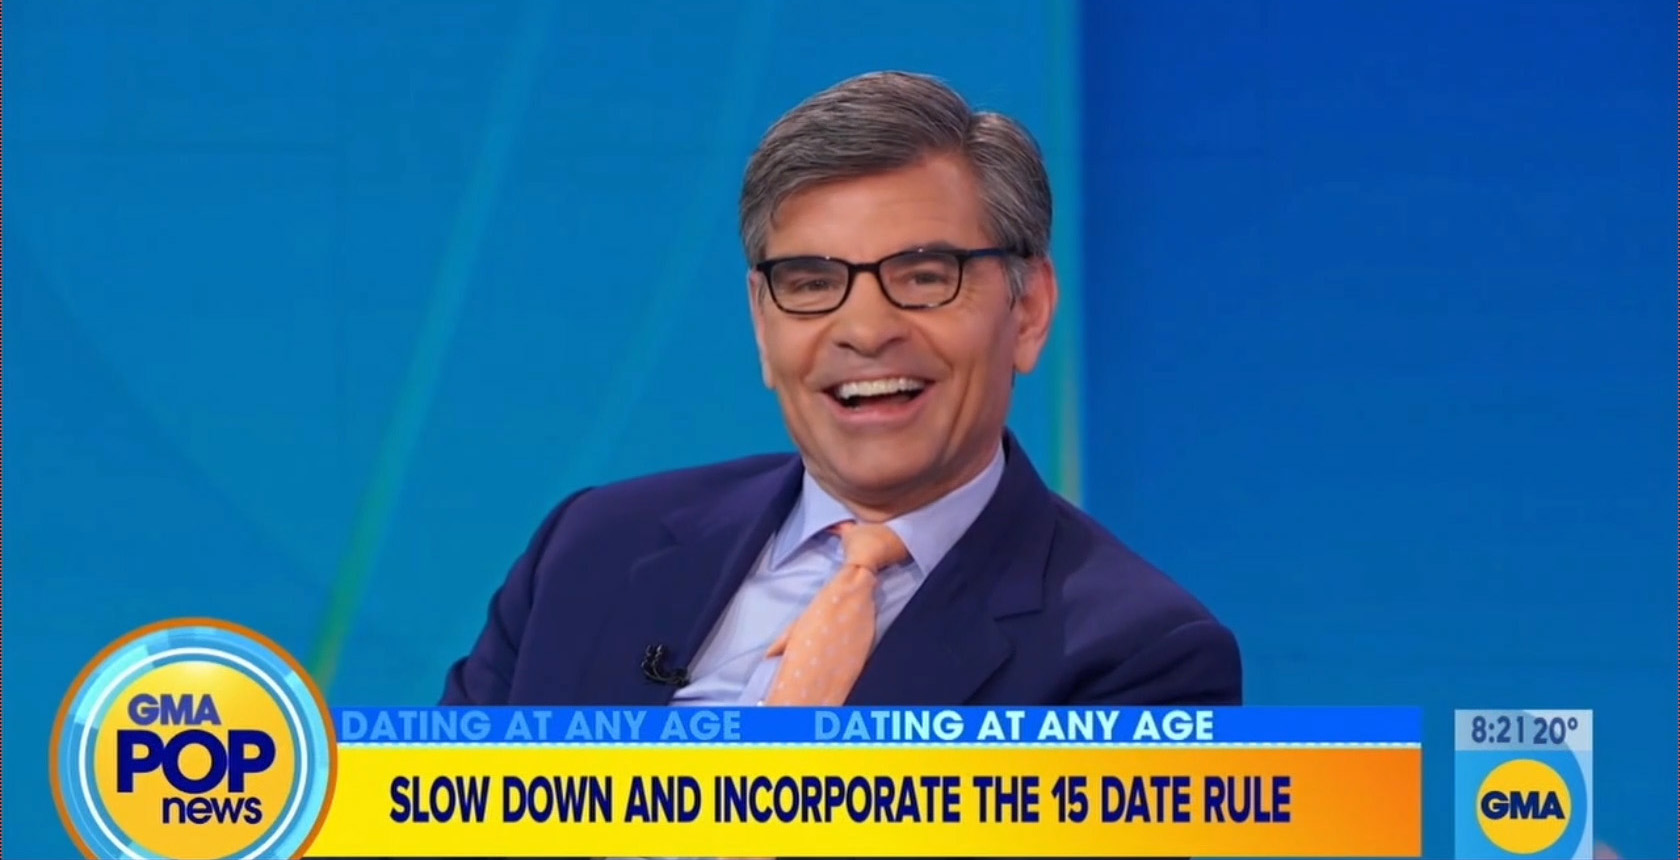 George Stephanopoulos said he and his wife are the exception because they got engaged two months after their first date and were married that same year